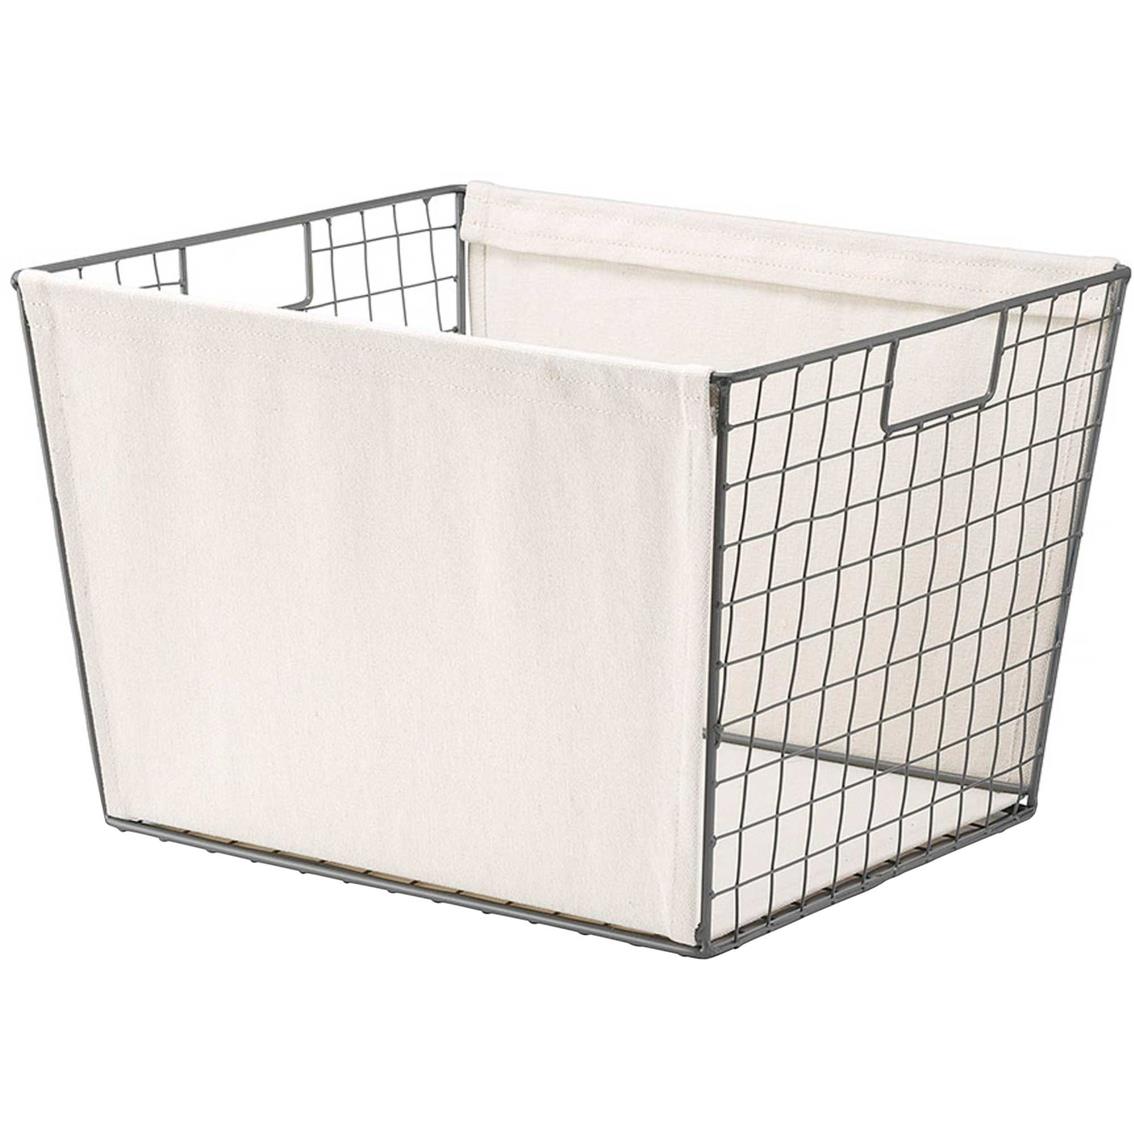 Whitmor Wire Tote Basket With Canvas Sides - Medium